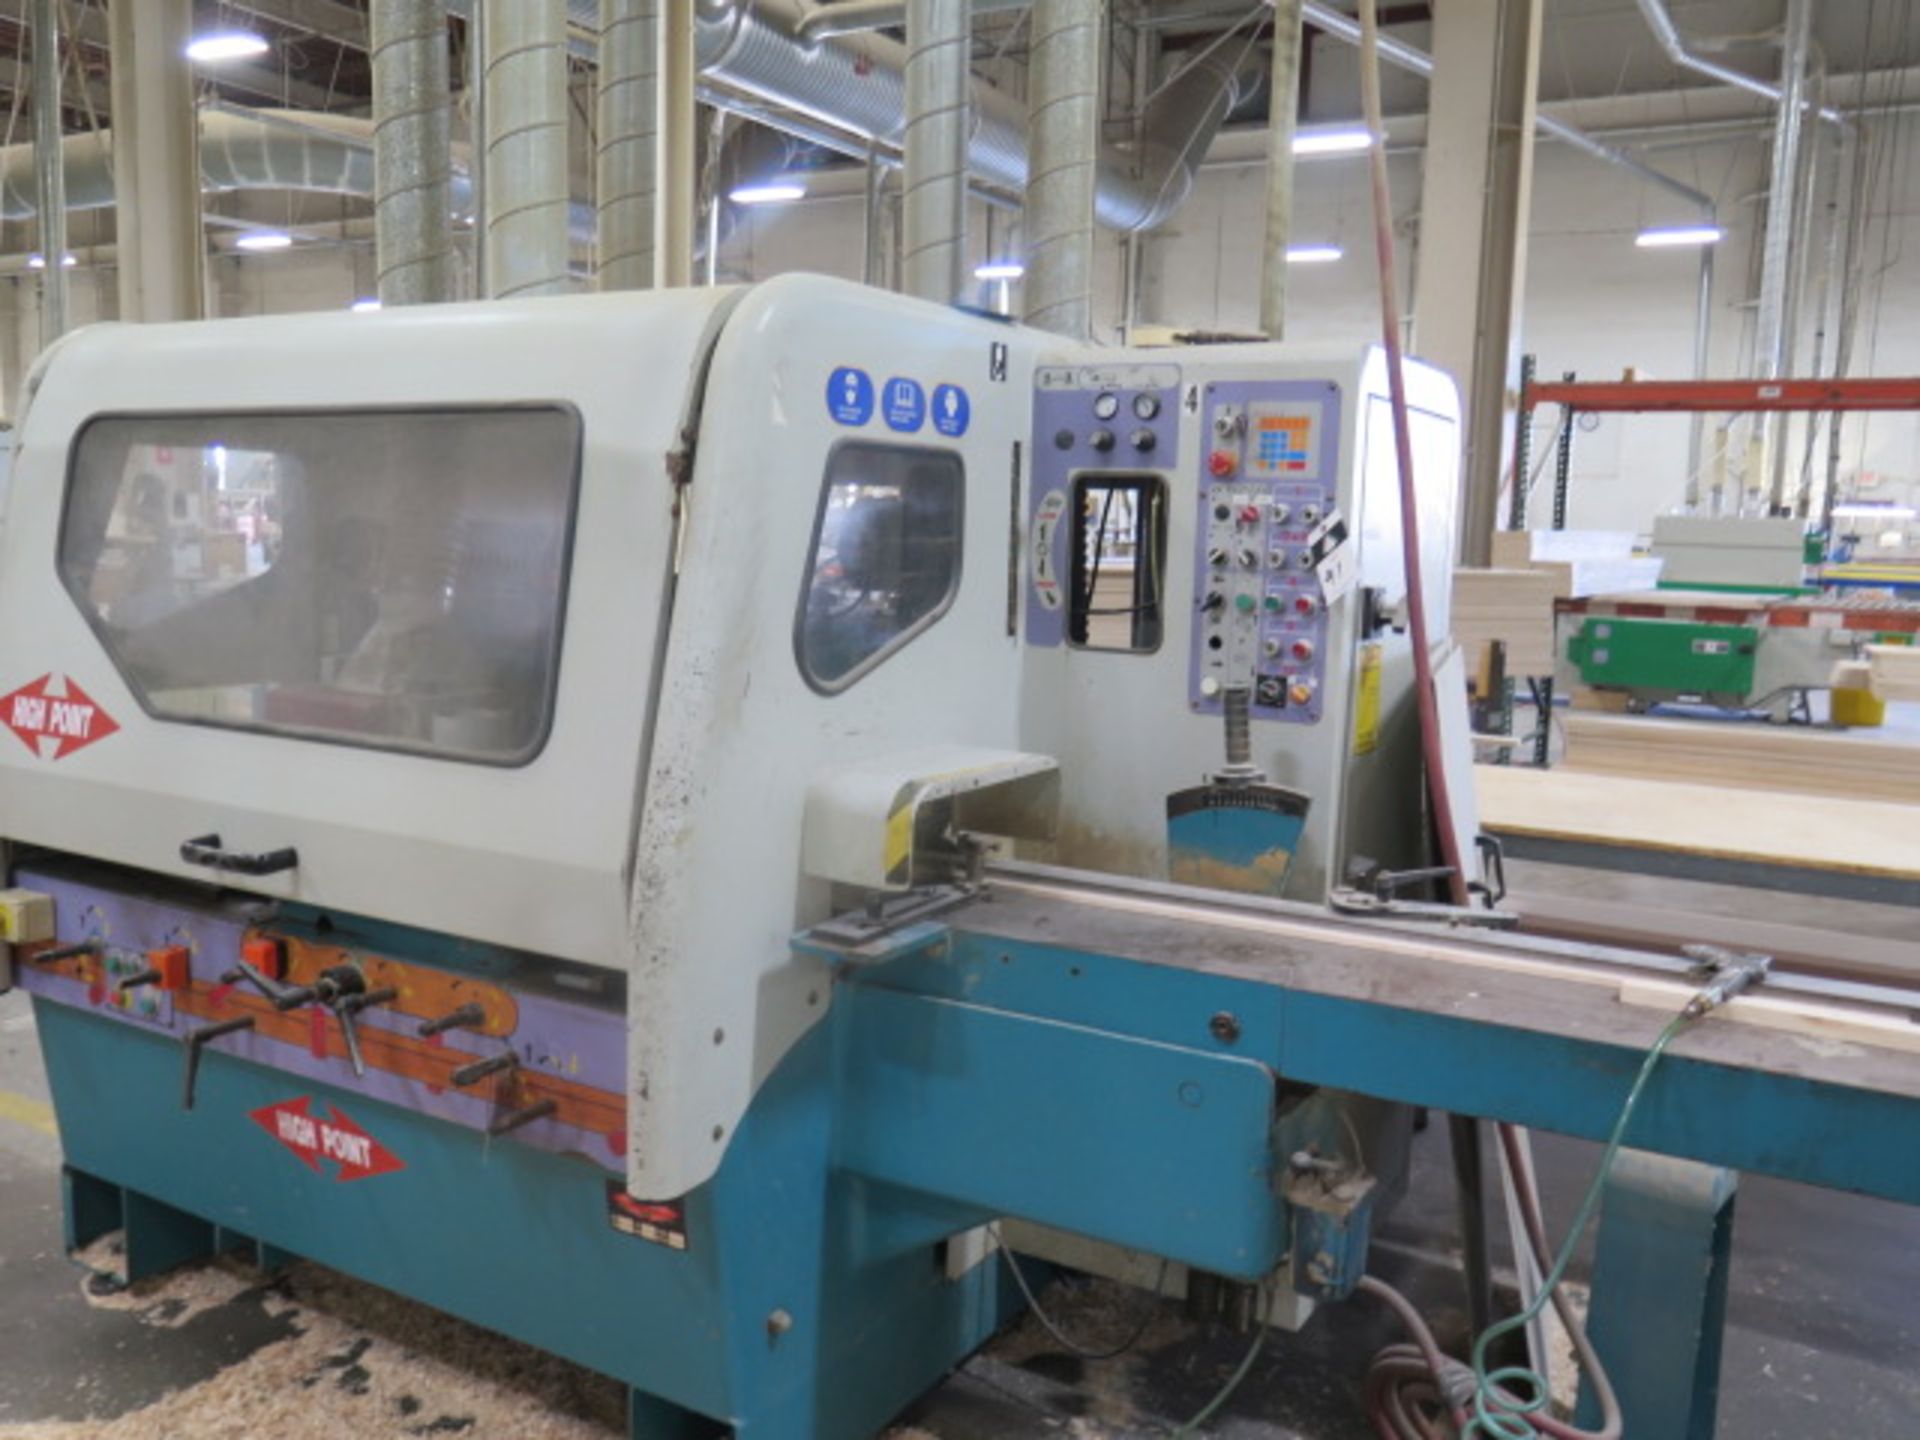 High Point CM-555 Multi-Head Moulding Machine (NEEDS REPAIR) s/n 02A0254 w/ High Point, SOLD AS IS